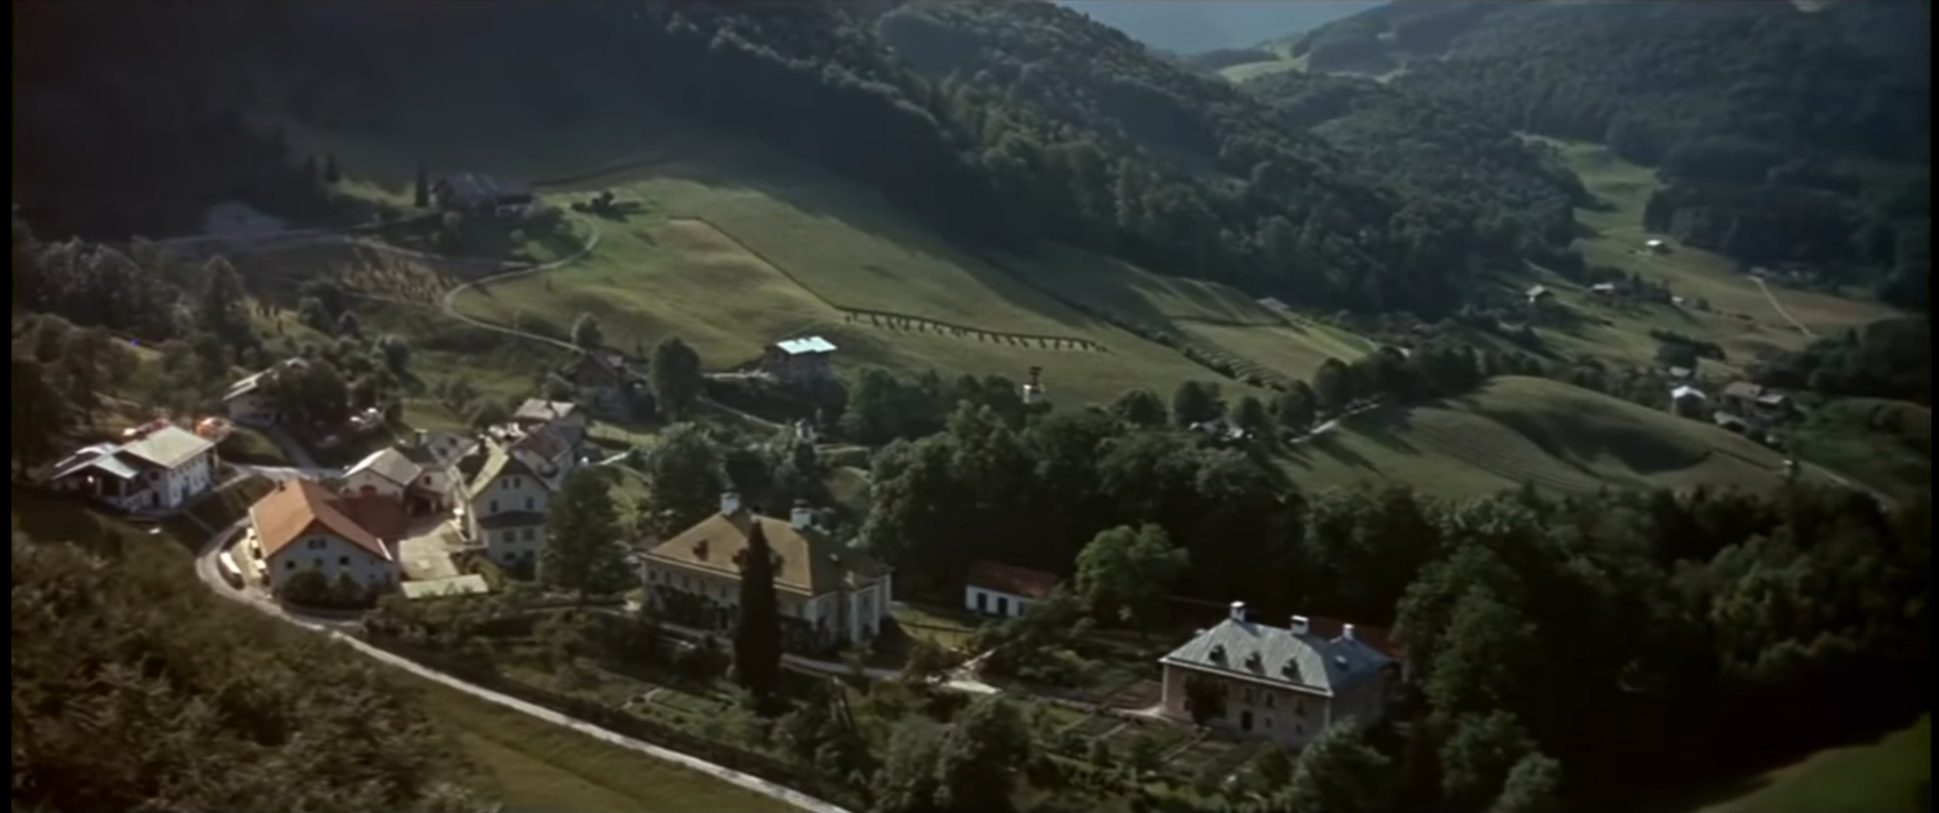 The Sound of Music Locations